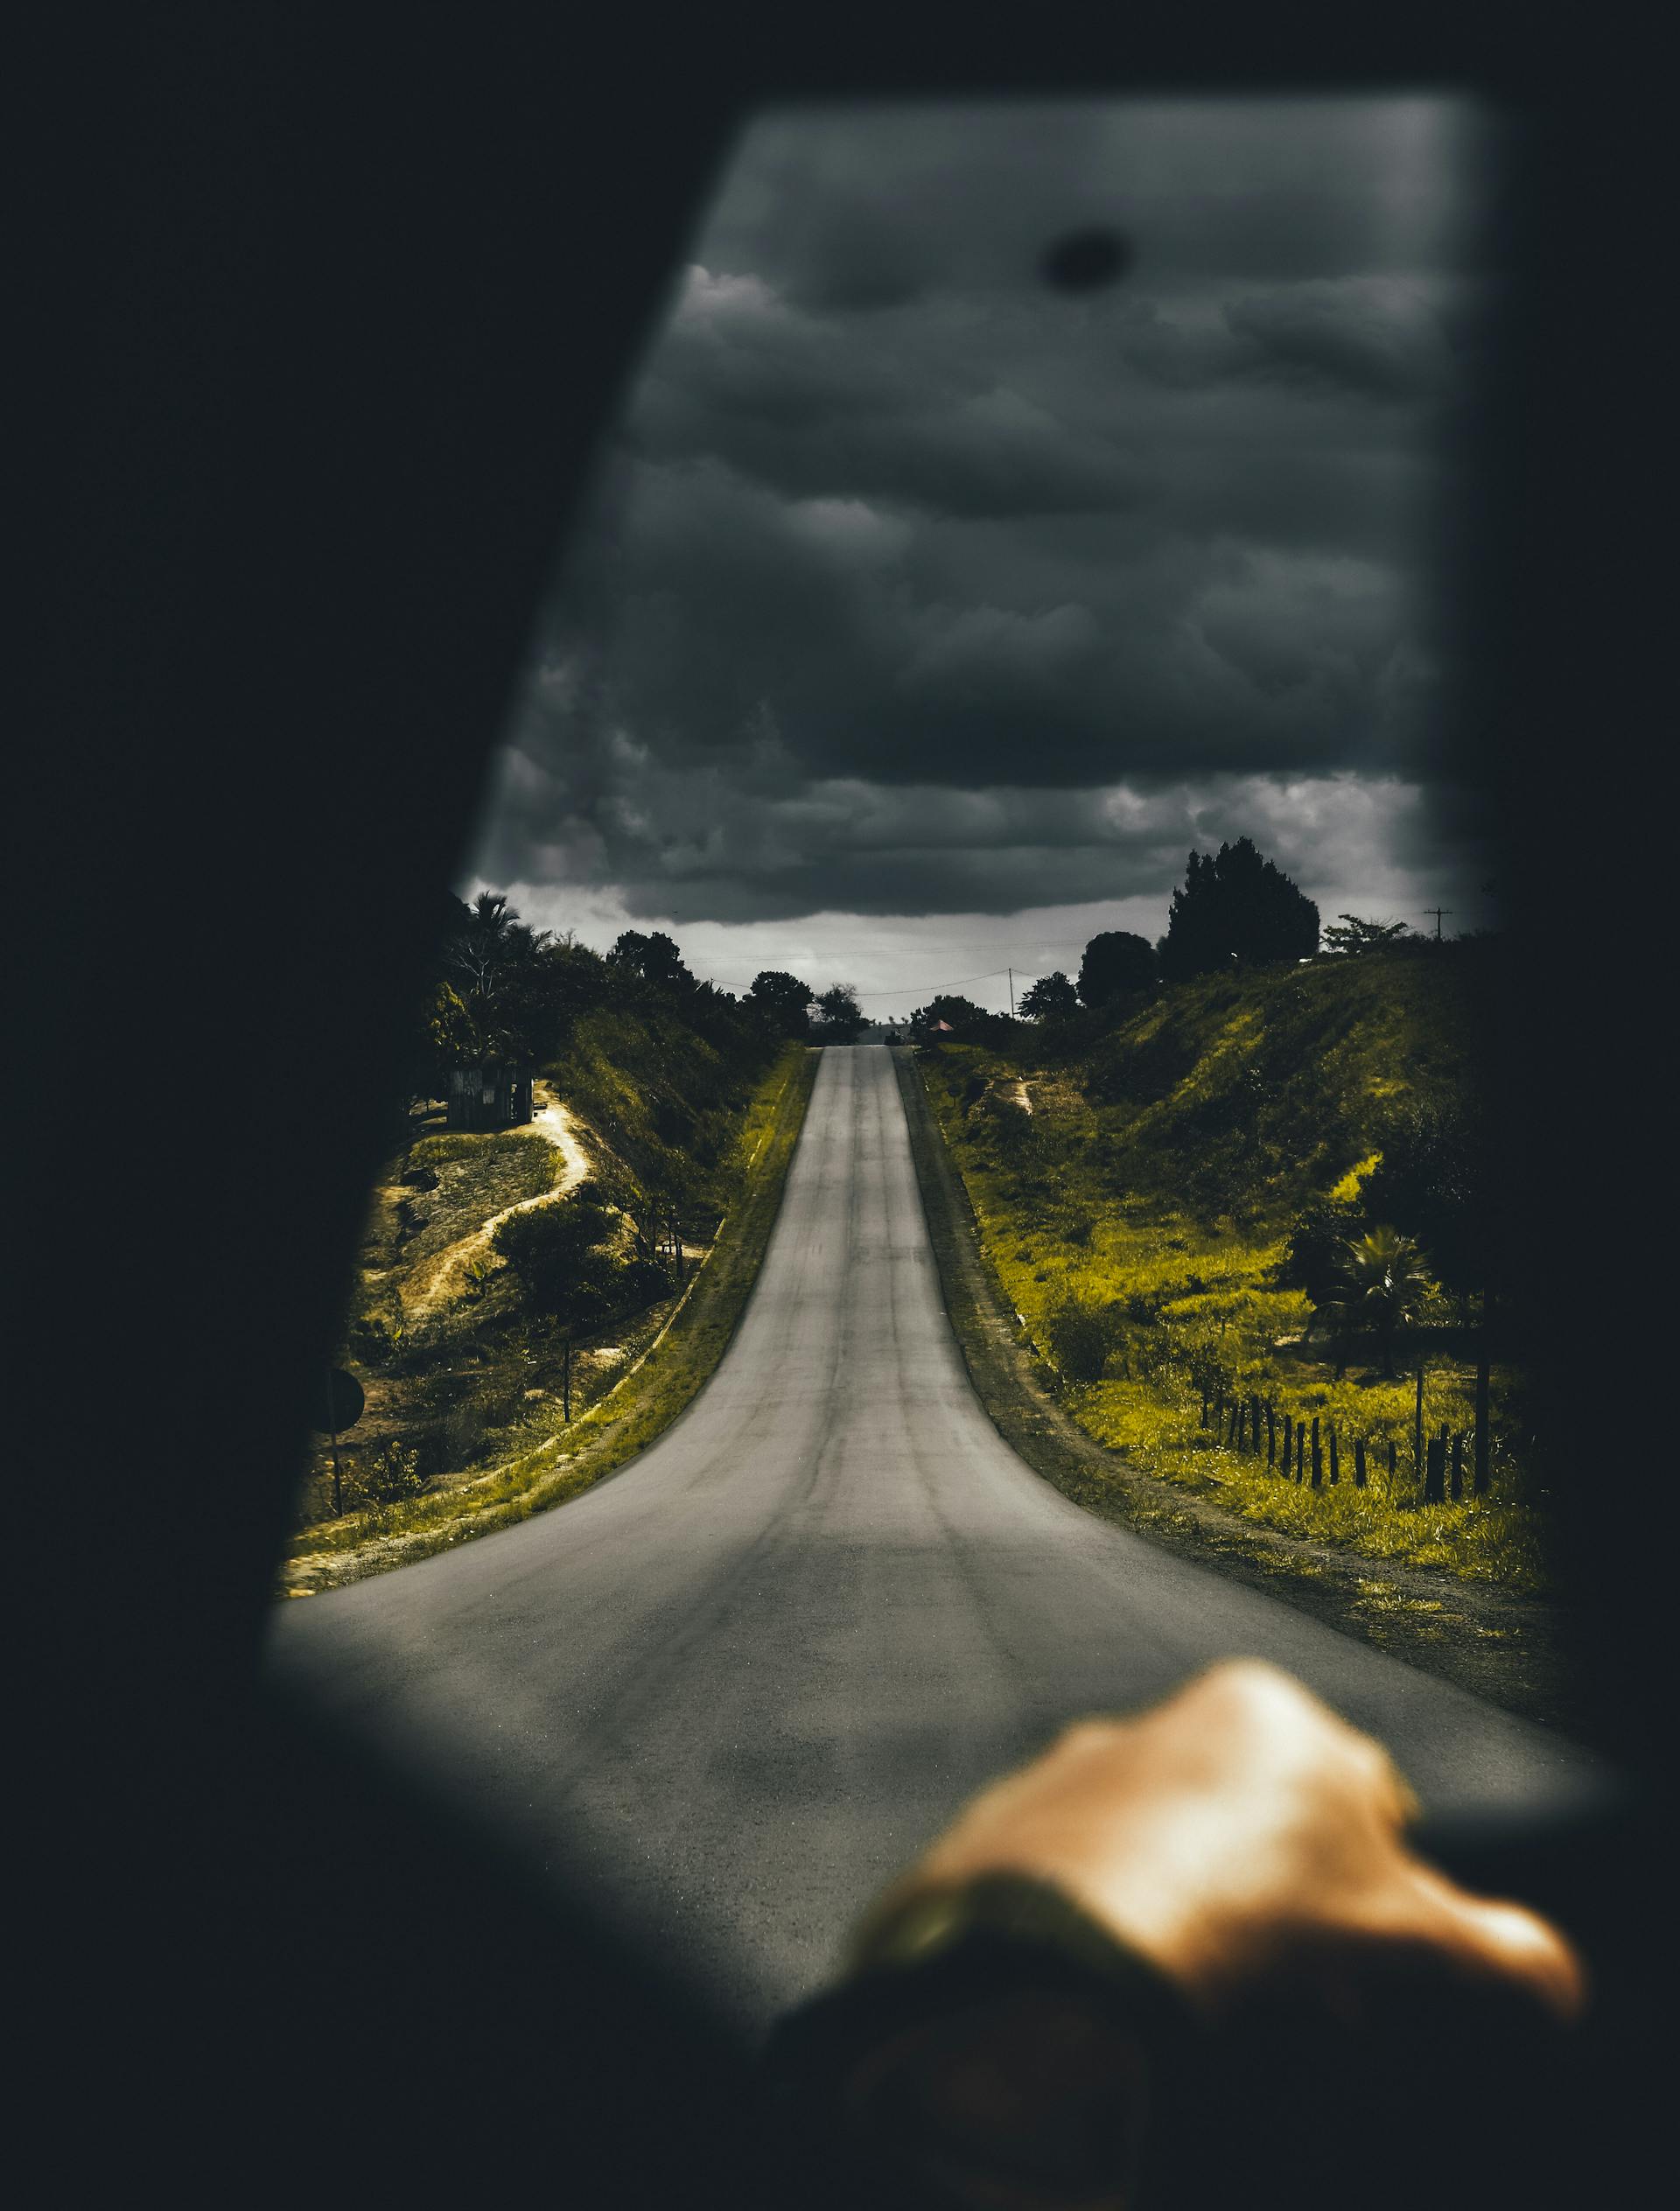 A person driving down a lonely road | Source: Pexels